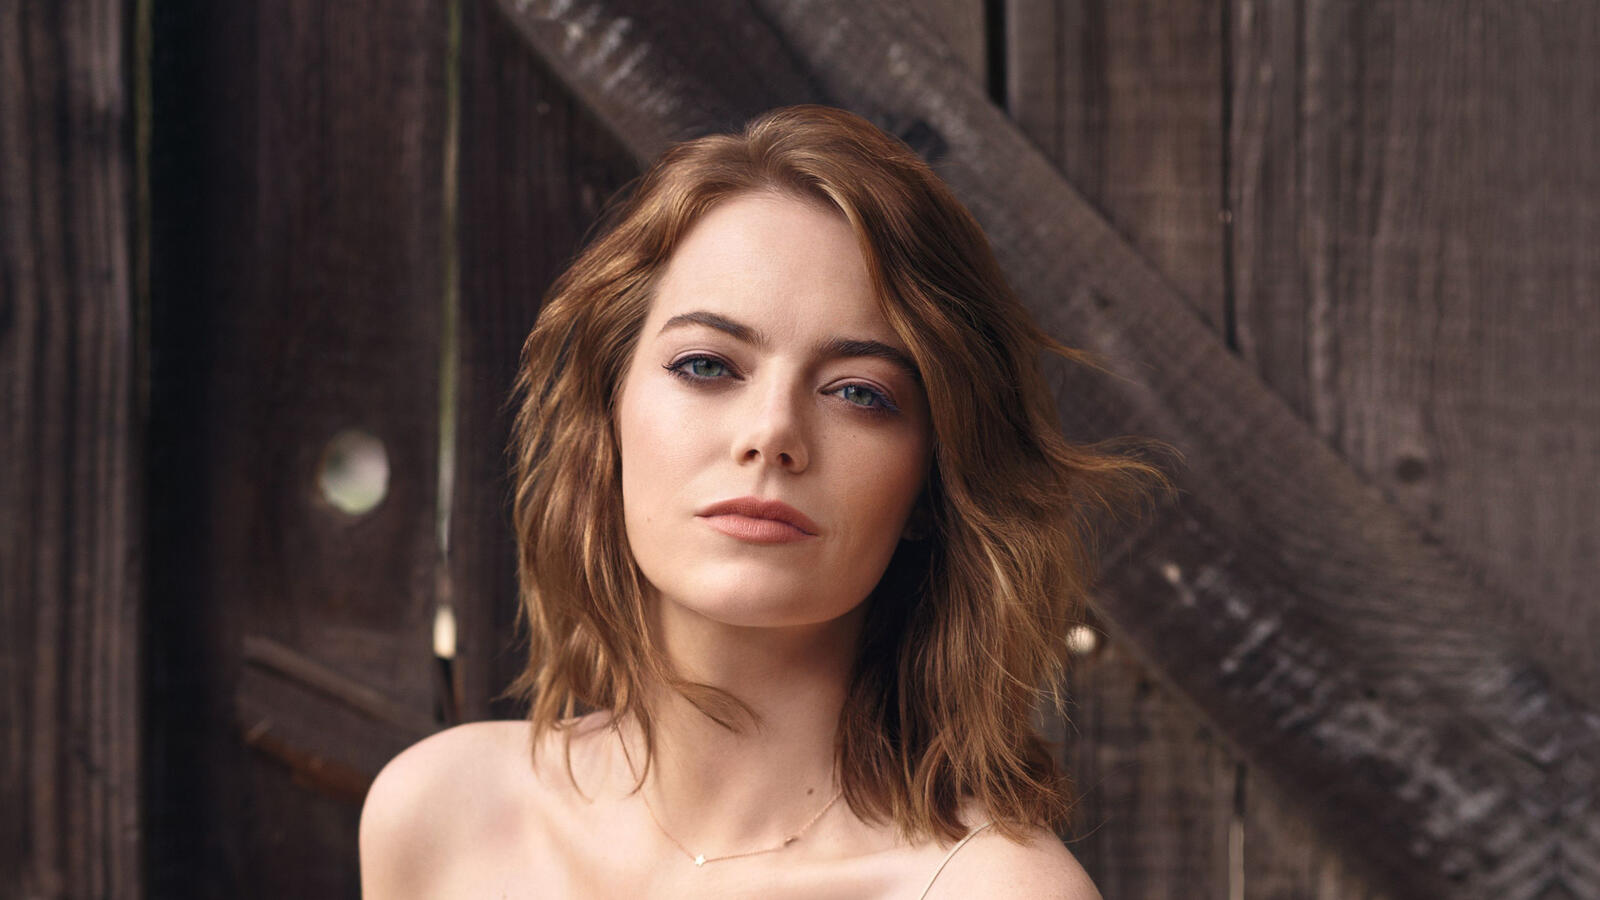 Wallpapers celebrity actress Emma Stone on the desktop